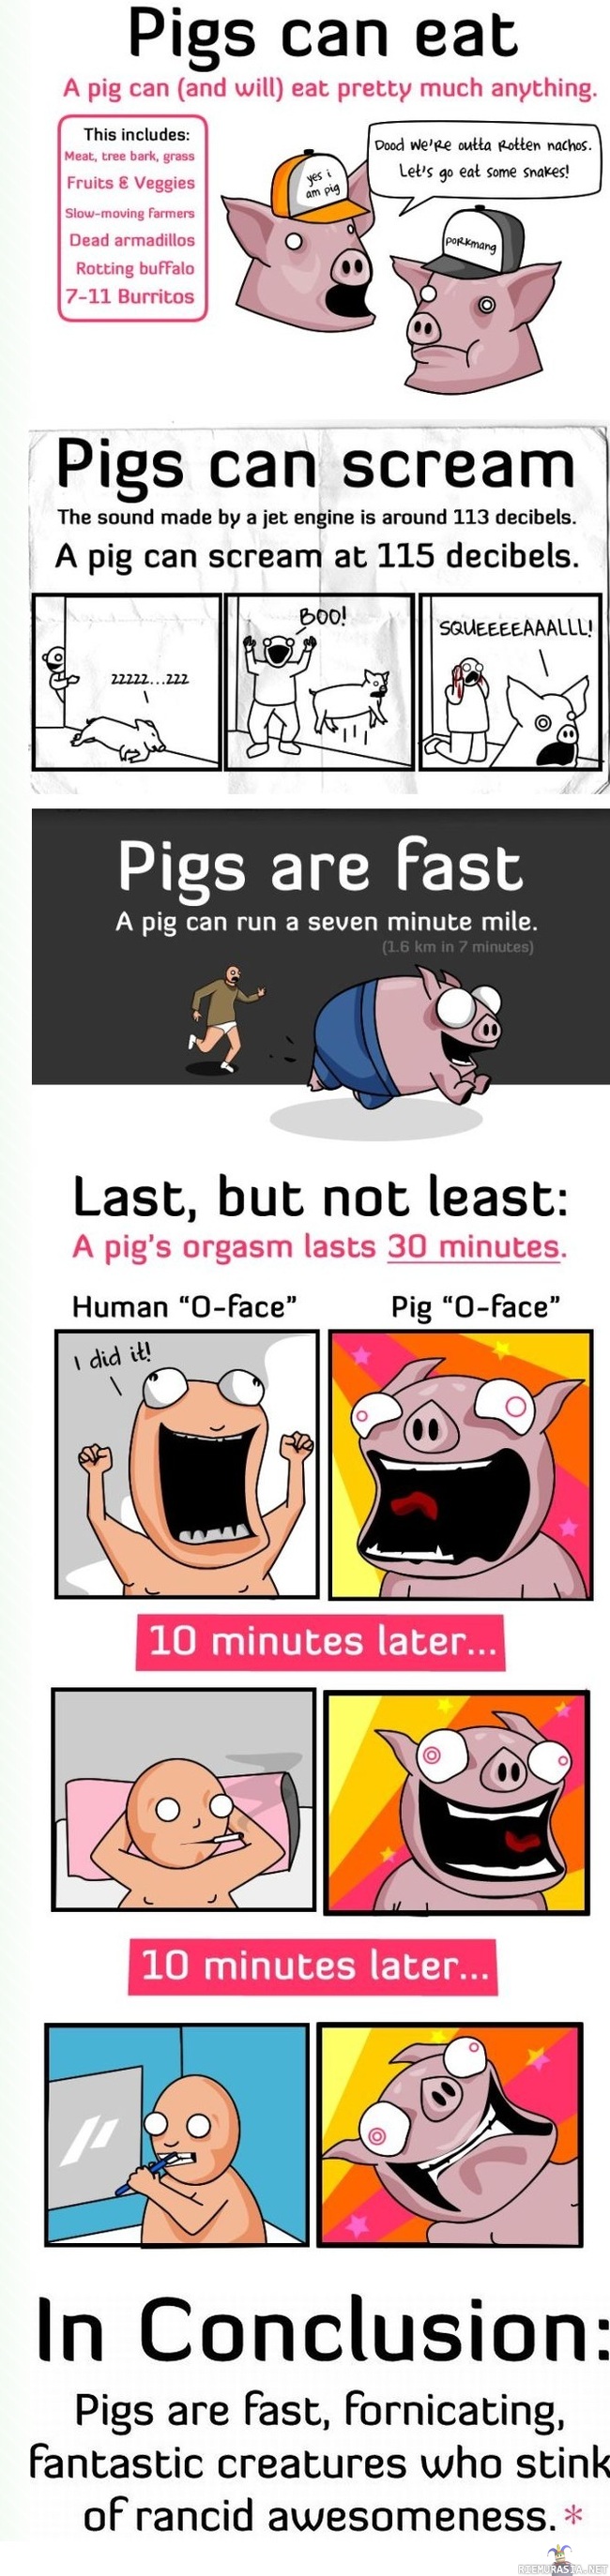 A few reasons why pigs are better than humans